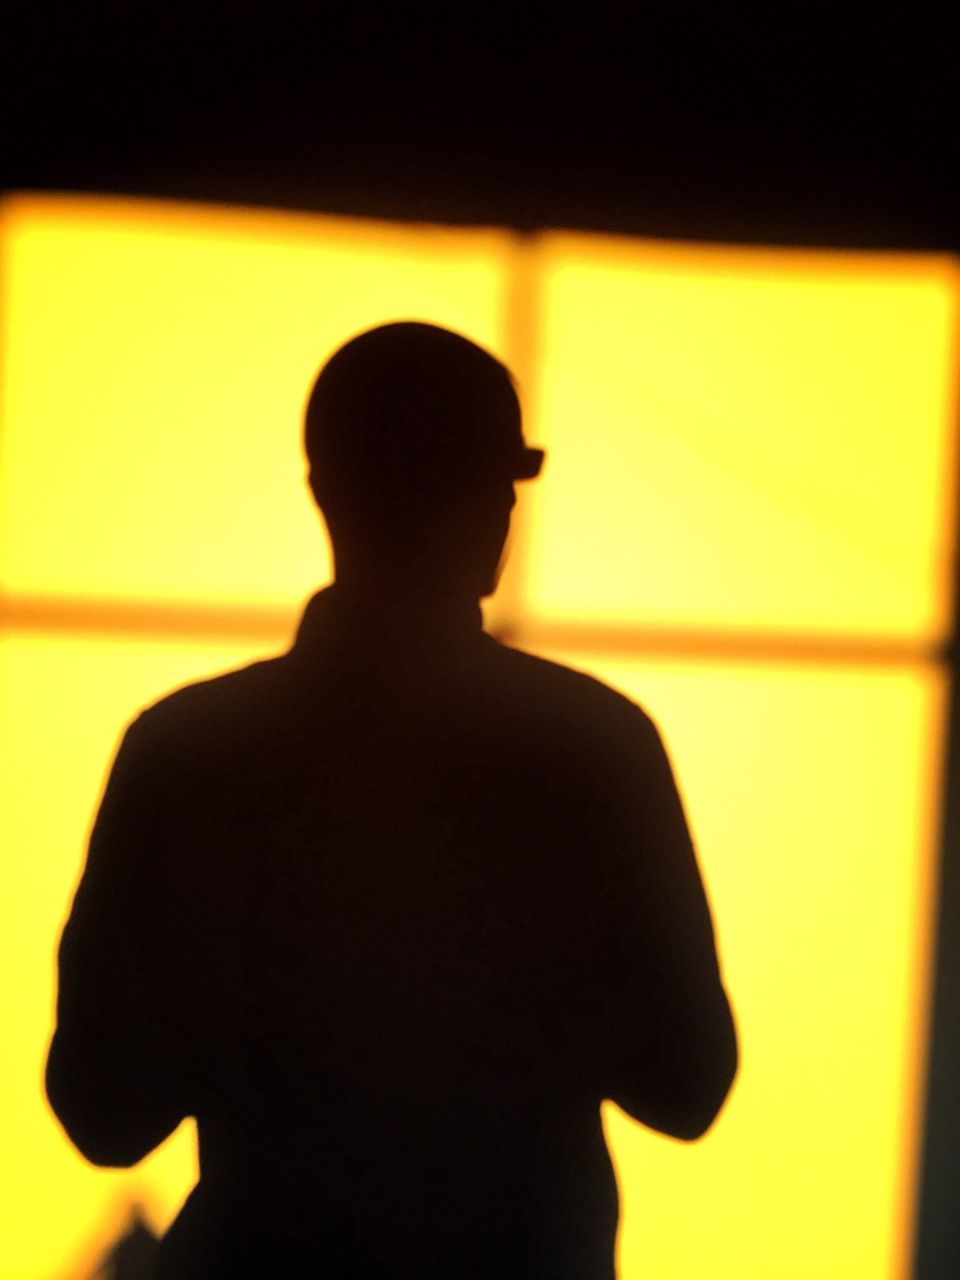 silhouette, indoors, lifestyles, standing, shadow, leisure activity, men, sunset, three quarter length, outline, waist up, dark, rear view, yellow, illuminated, person, orange color, side view